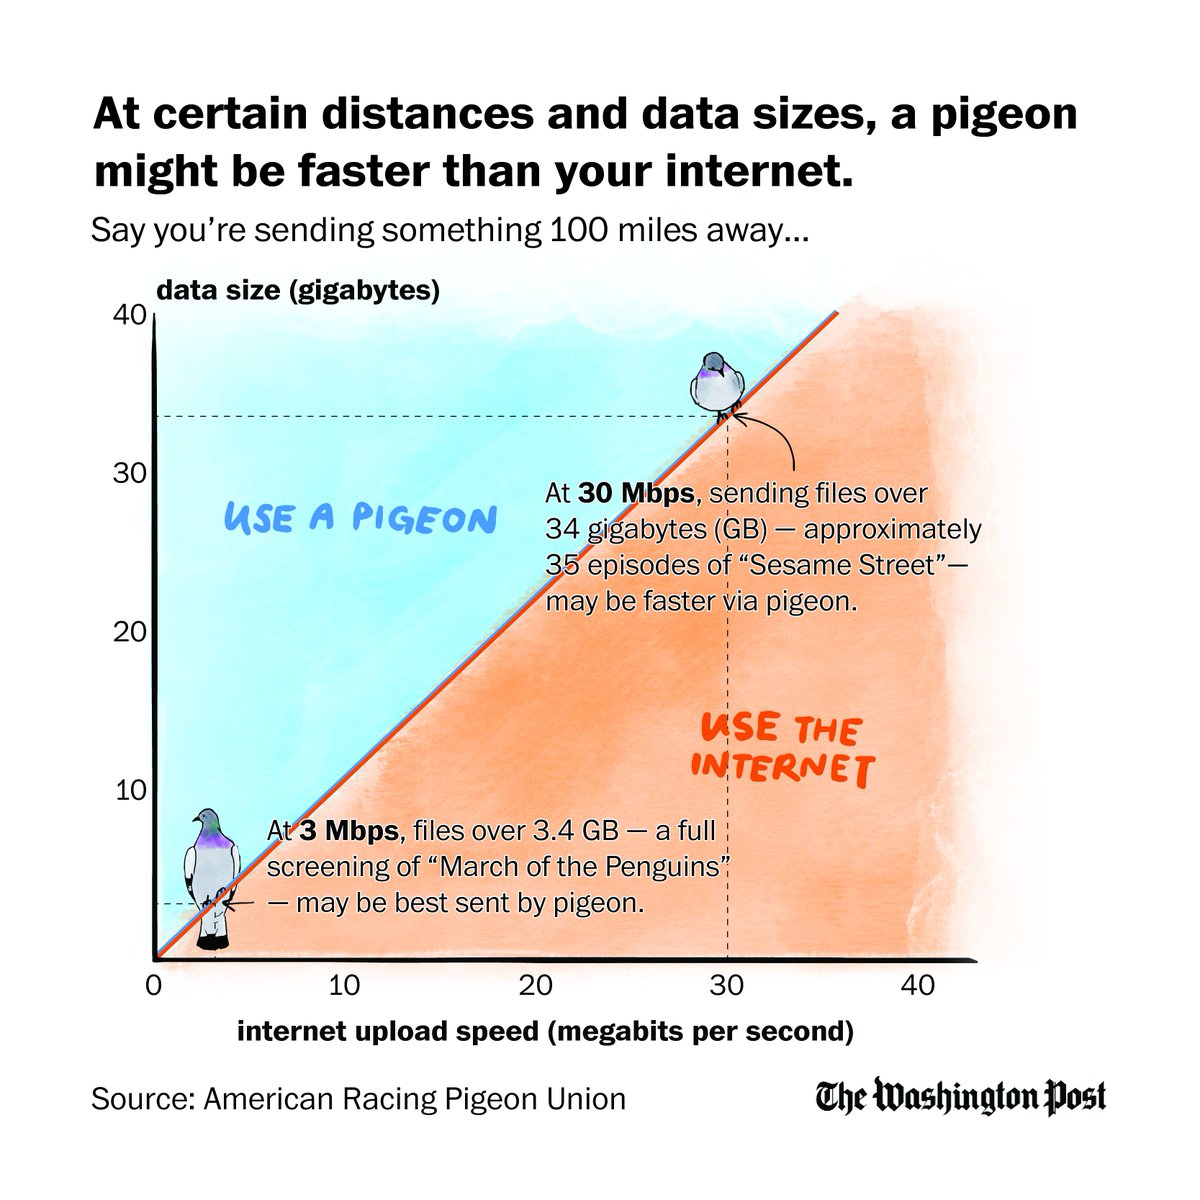 this week, i learned that pigeons are kind of fast. sometimes, they're faster than your internet?!?! what pigeons can say about broadband disparities: wapo.st/40AhOpo